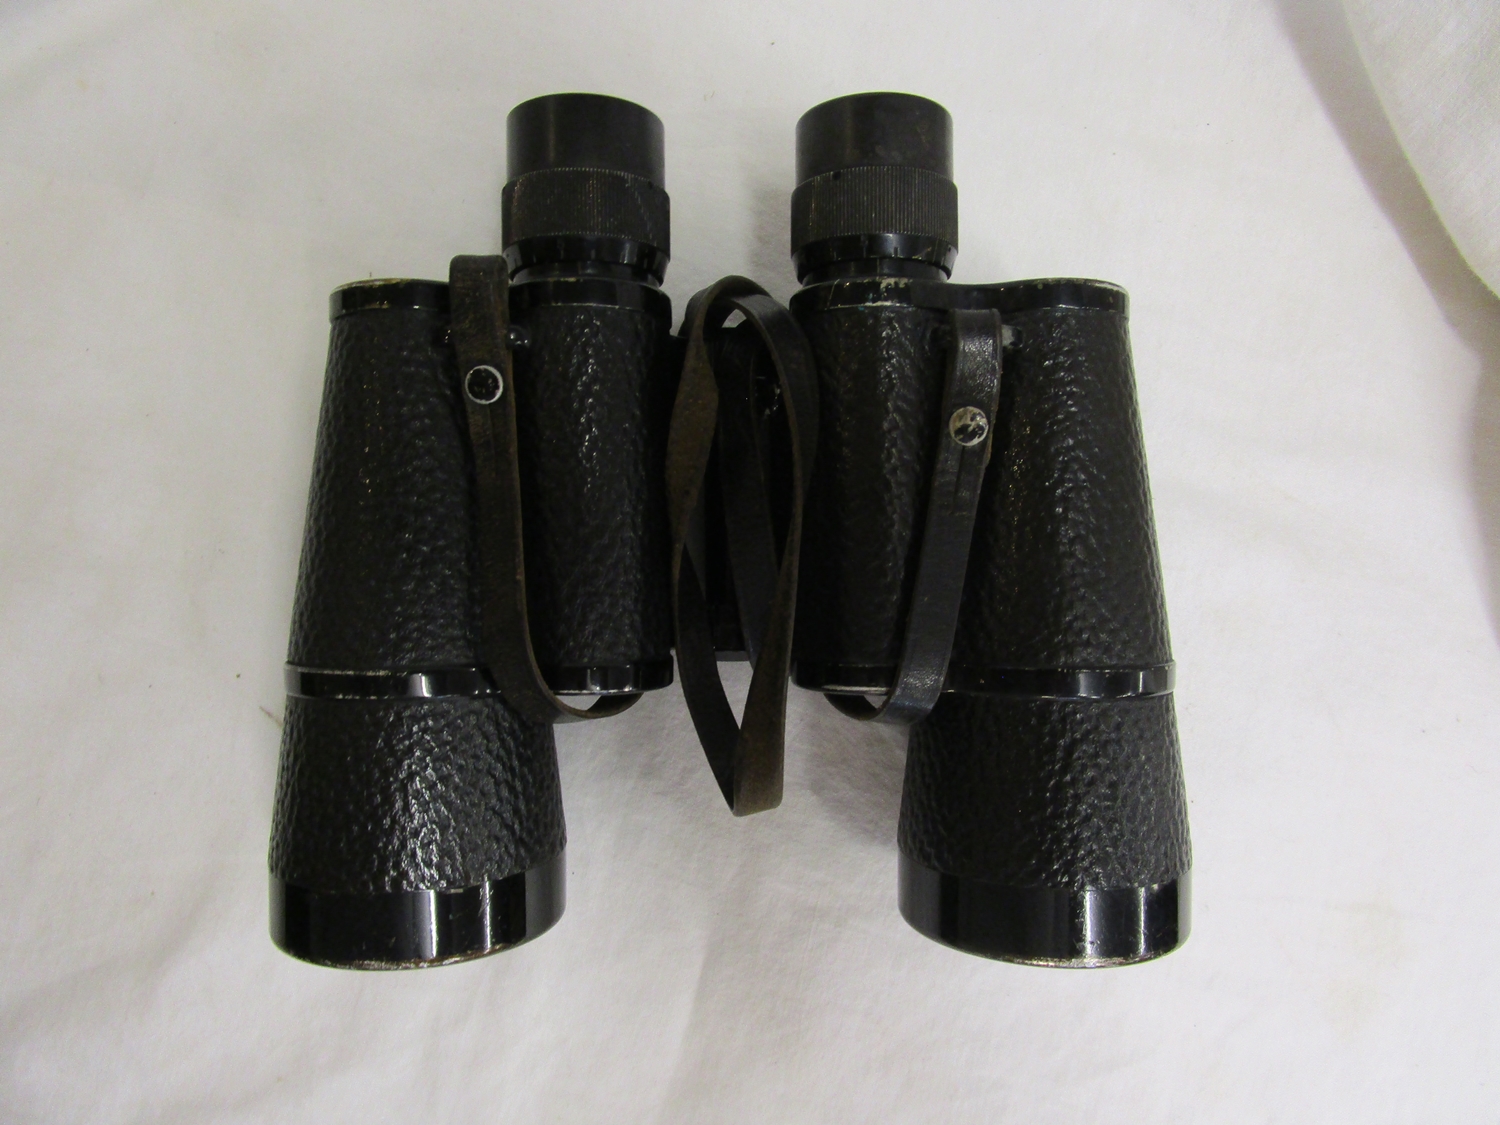 Nazi WWII Carl Zeiss 7x50 binoculars, marked with eagle and swastika - Image 5 of 10